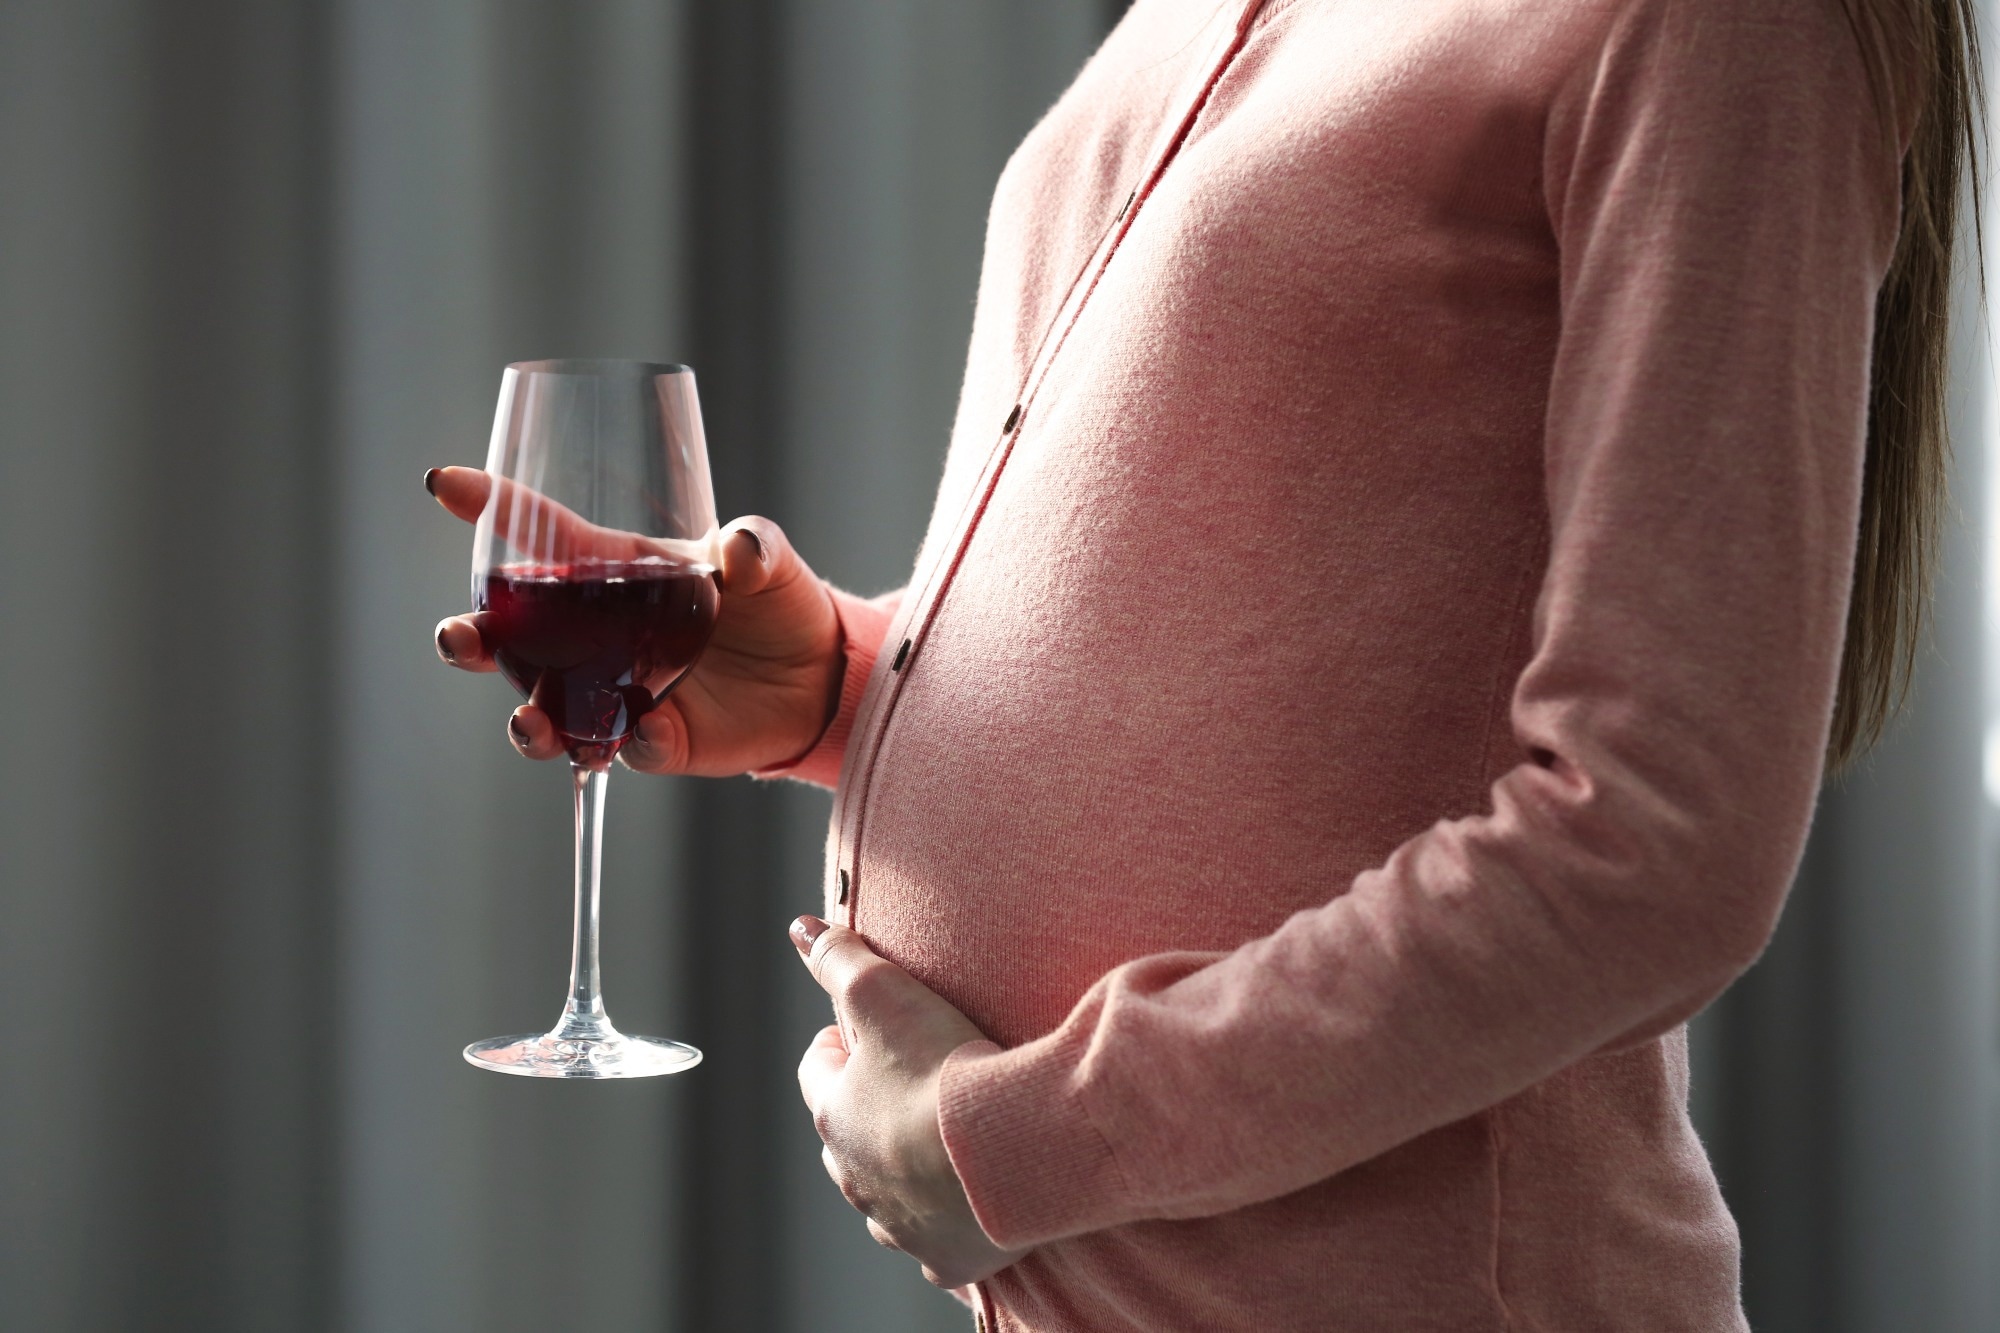 Is alcohol exposure before and during pregnancy associated with reduced longitudinal fetal growth?